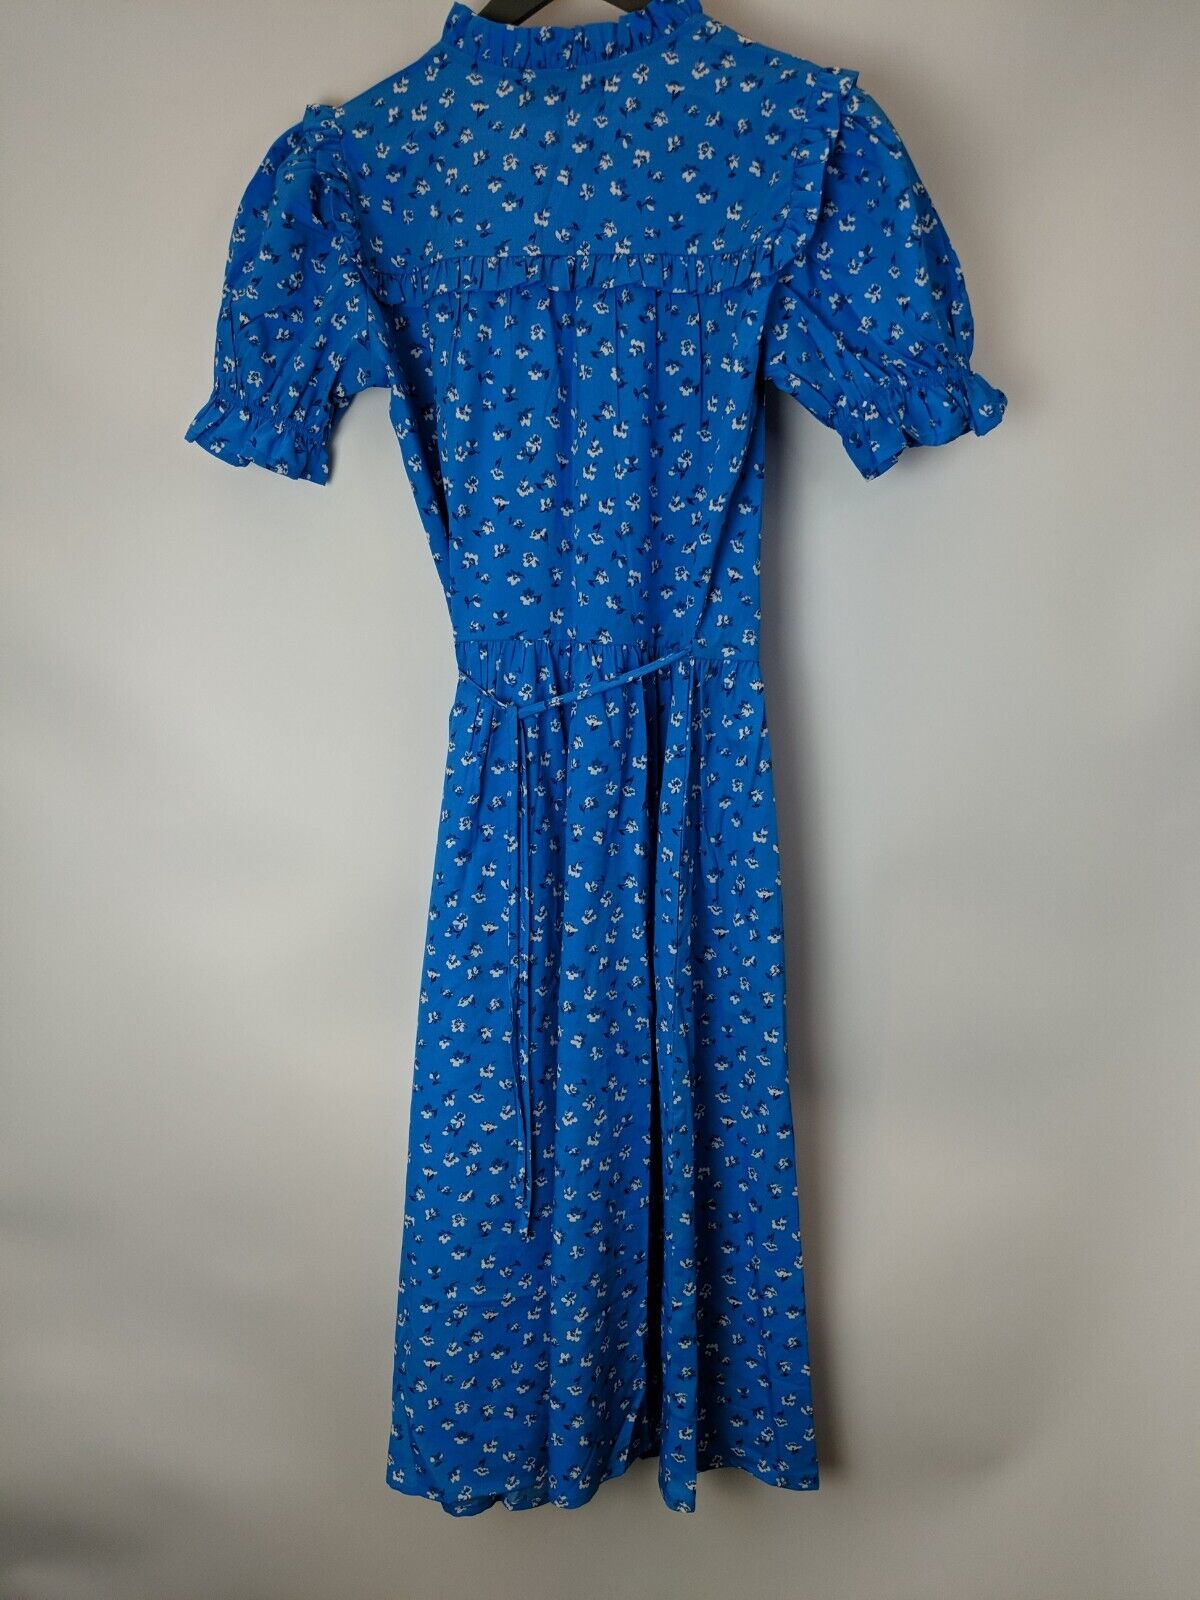 In The Style Blue Wrap Dress- Blue Floral Print. UK Size 6 ****Ref V31